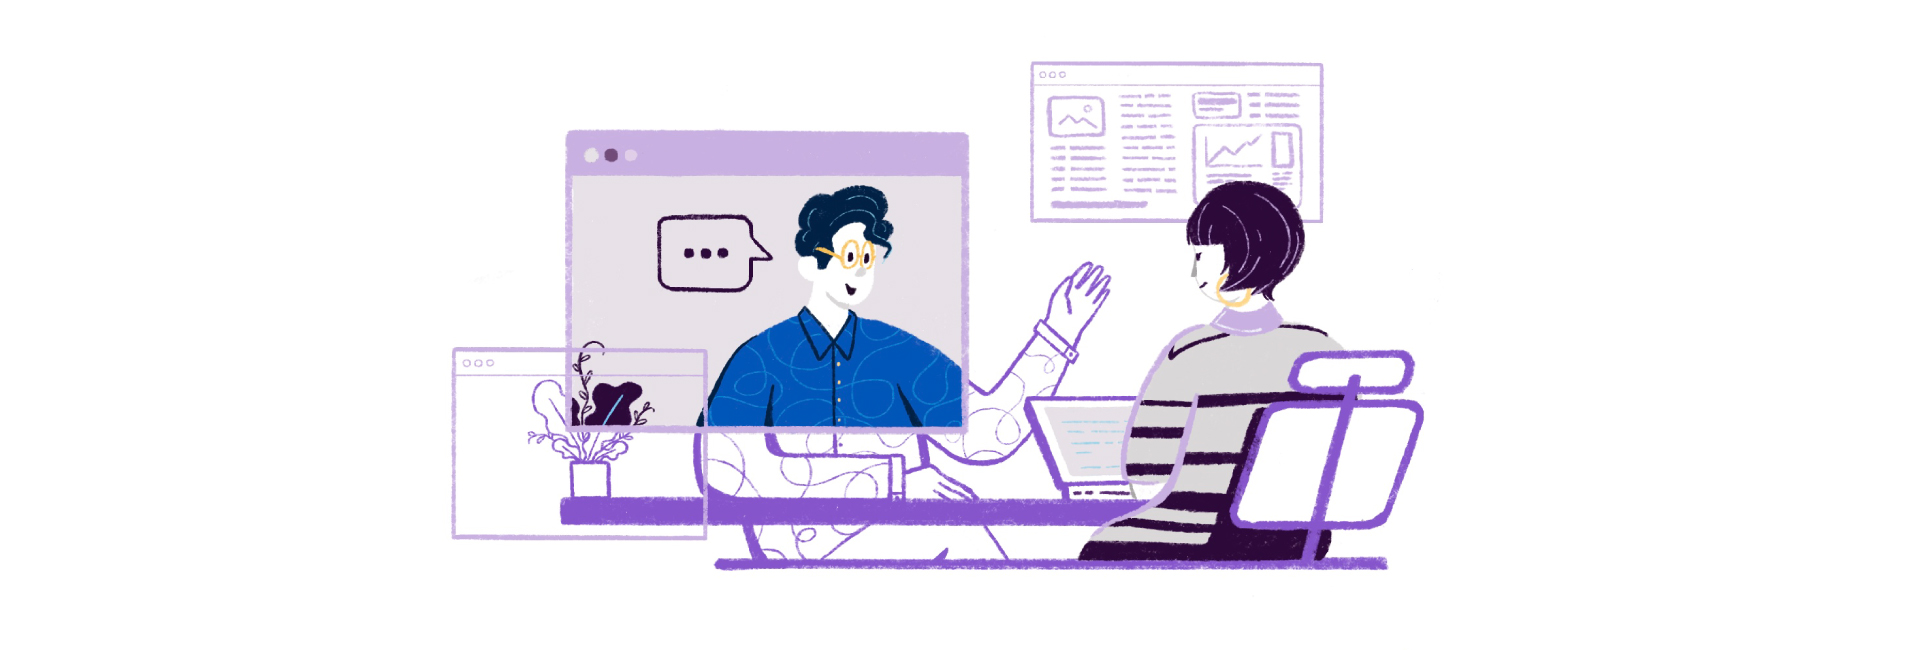 Illustration of two people talking at a desk